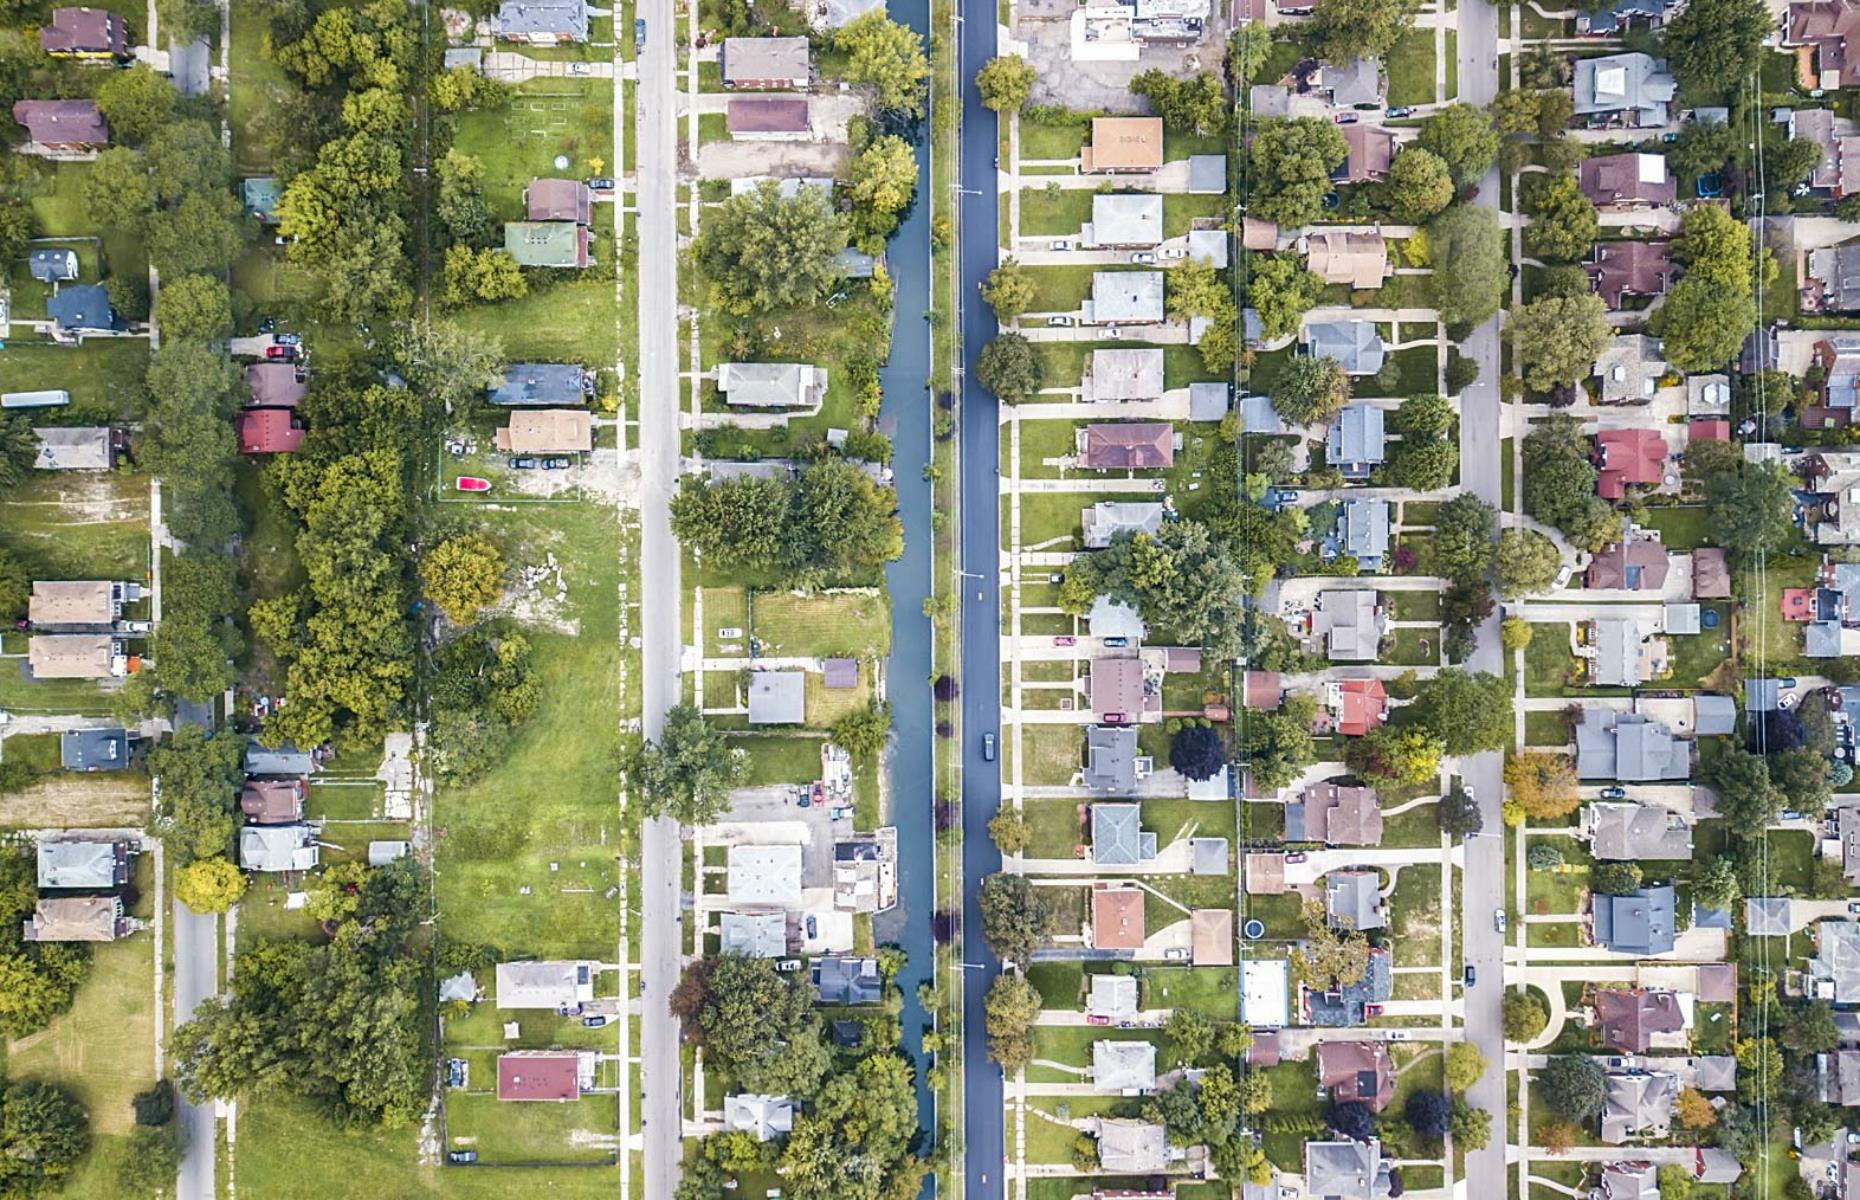 Grosse Point, on the right, isn't technically within Detroit's boundary, but is known as one of the city's wealthiest areas. A canal separates the neighborhood from Jefferson Chalmers, which although it has fewer houses is much less affluent.